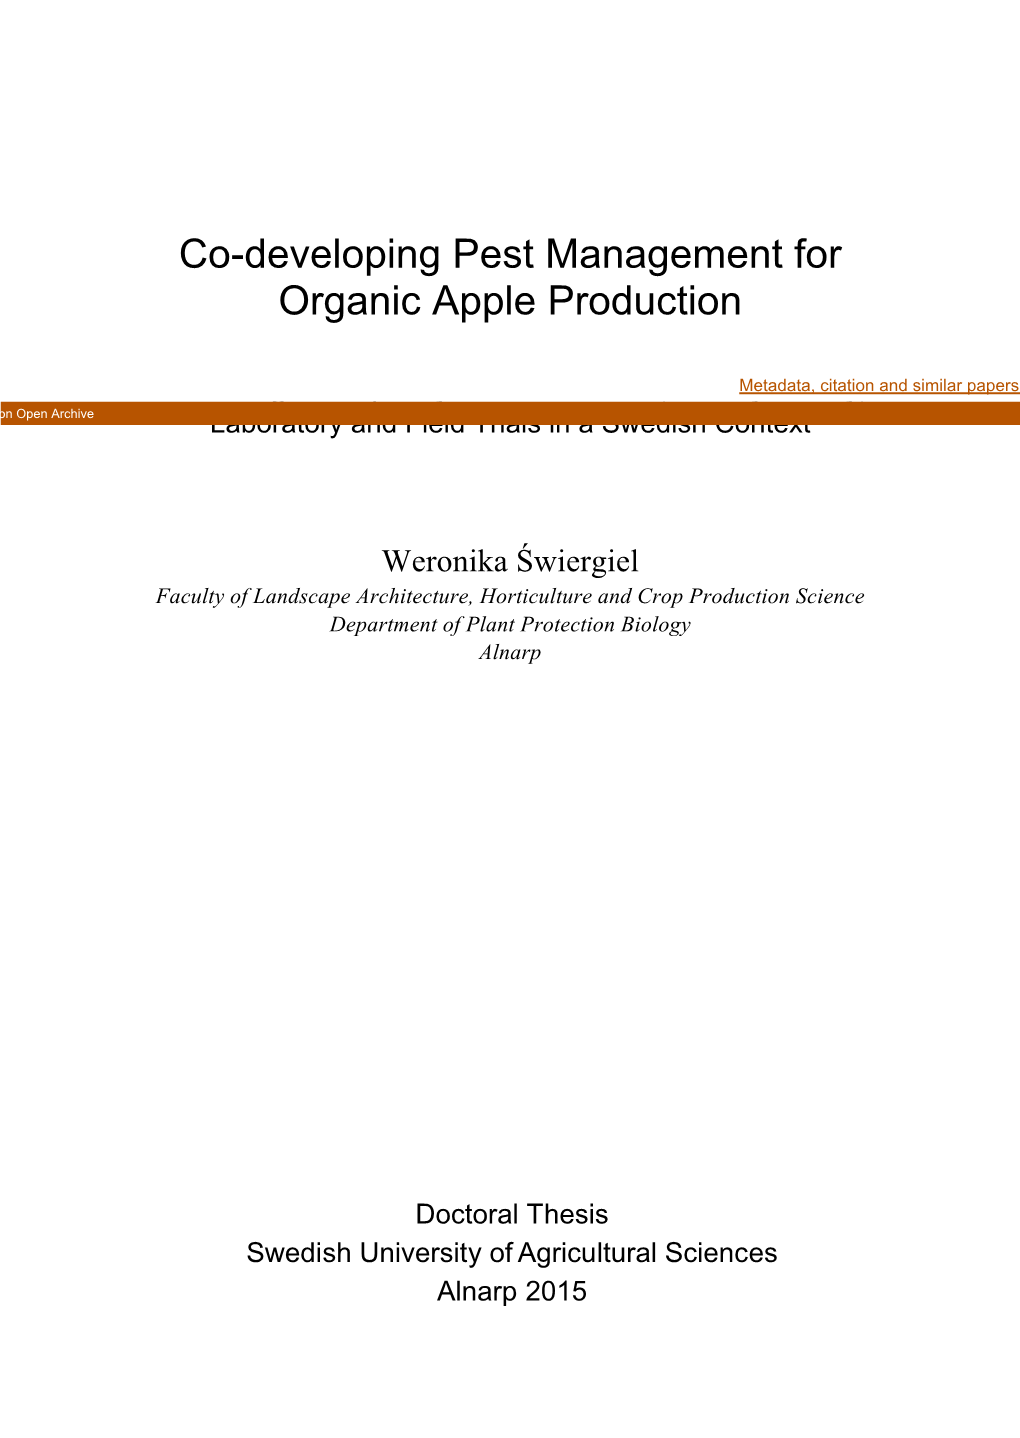 Co-Developing Pest Management for Organic Apple Production